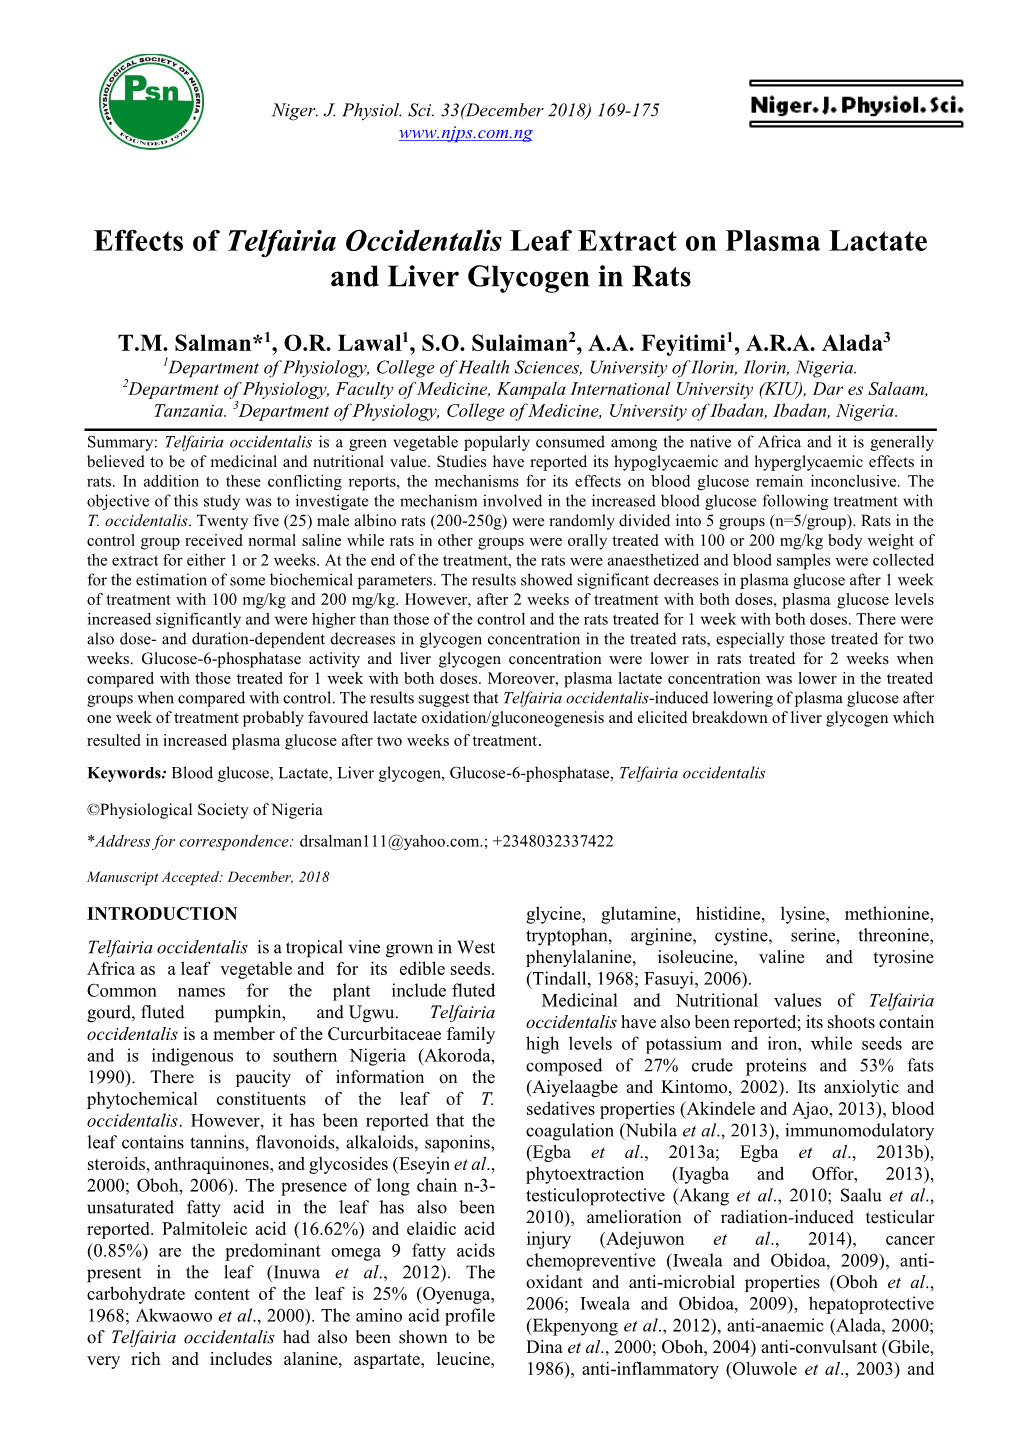 Effects of Telfairia Occidentalis Leaf Extract on Plasma Lactate and Liver Glycogen in Rats